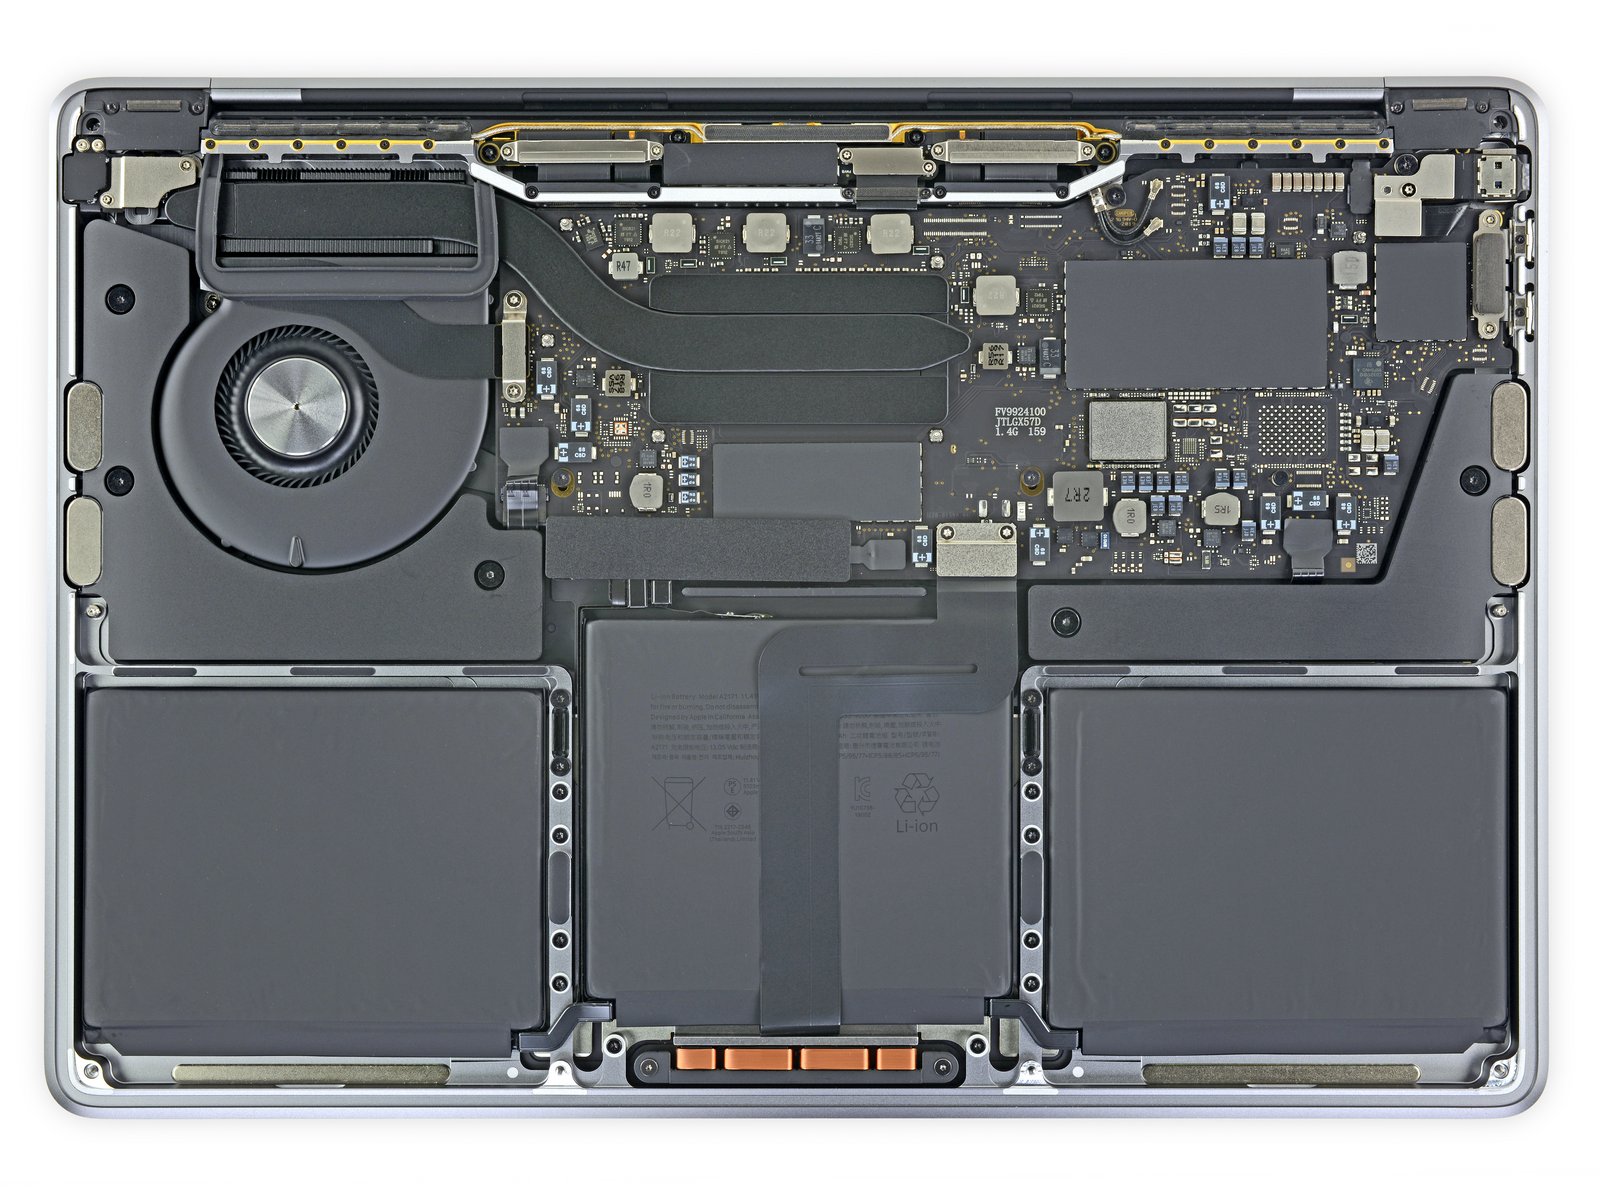 The 2019 13-inch MacBook Pro is even less repairable than its